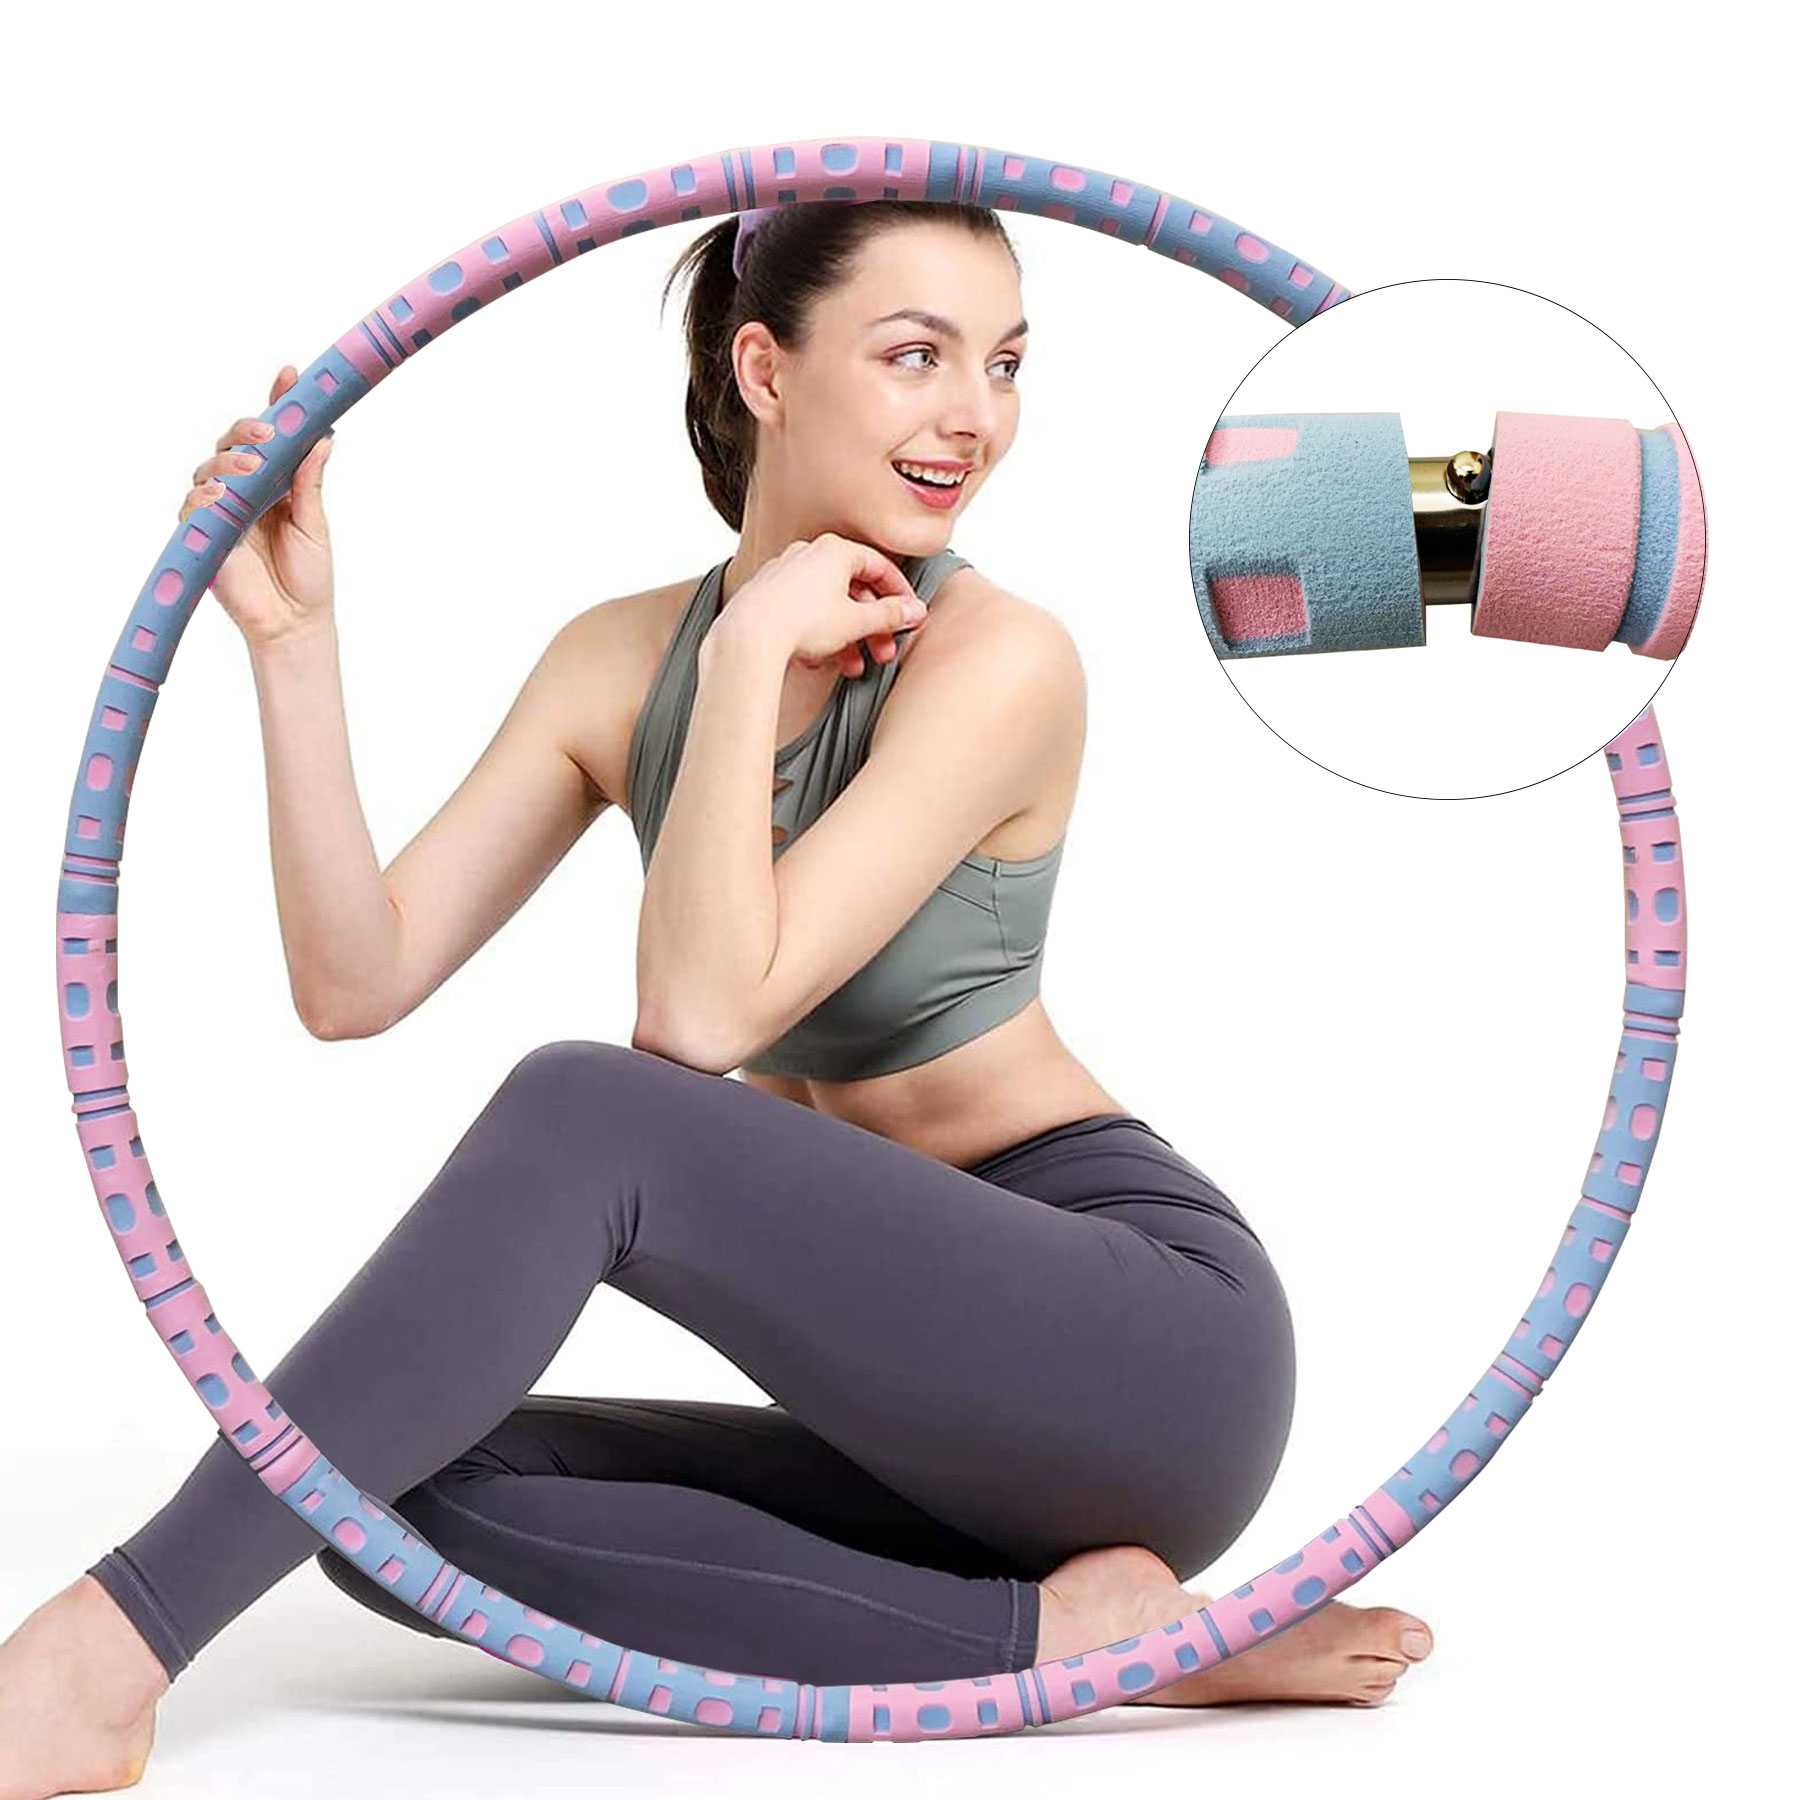 Internal Stainless Steel Wire Female Massage Fat Burning and Fat Elimination Yoga Fitness Exercise Auxiliary Equipment arm Hula Hoops 2 Pieces of Soft Foam 